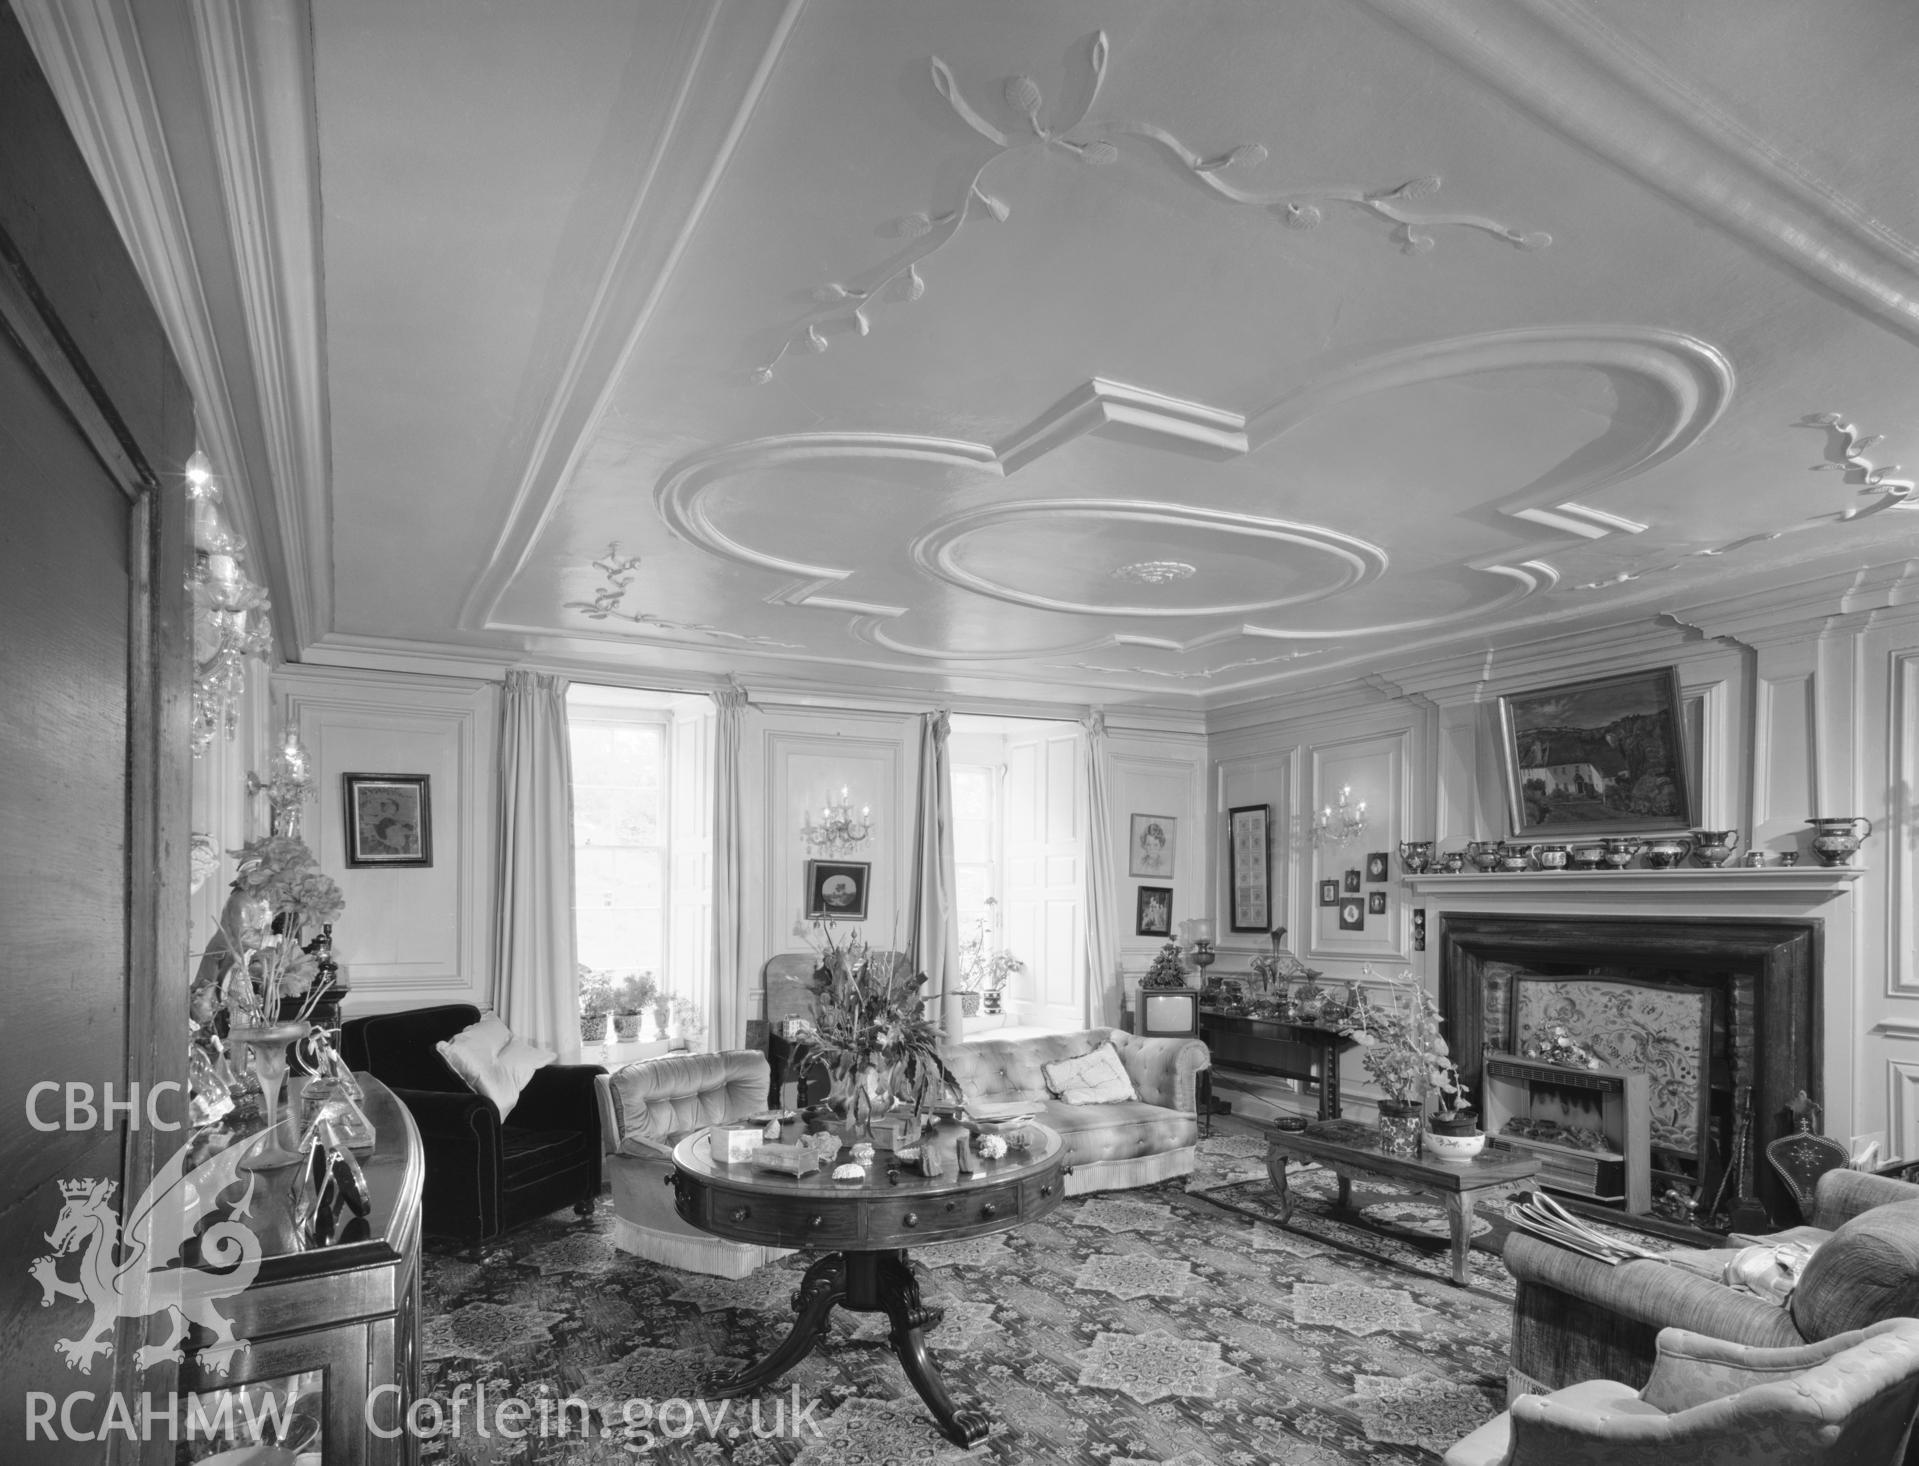 Interior, drawing room. Cards Co History Vol III Chapter 12, fig 50. NA/CD/99/001